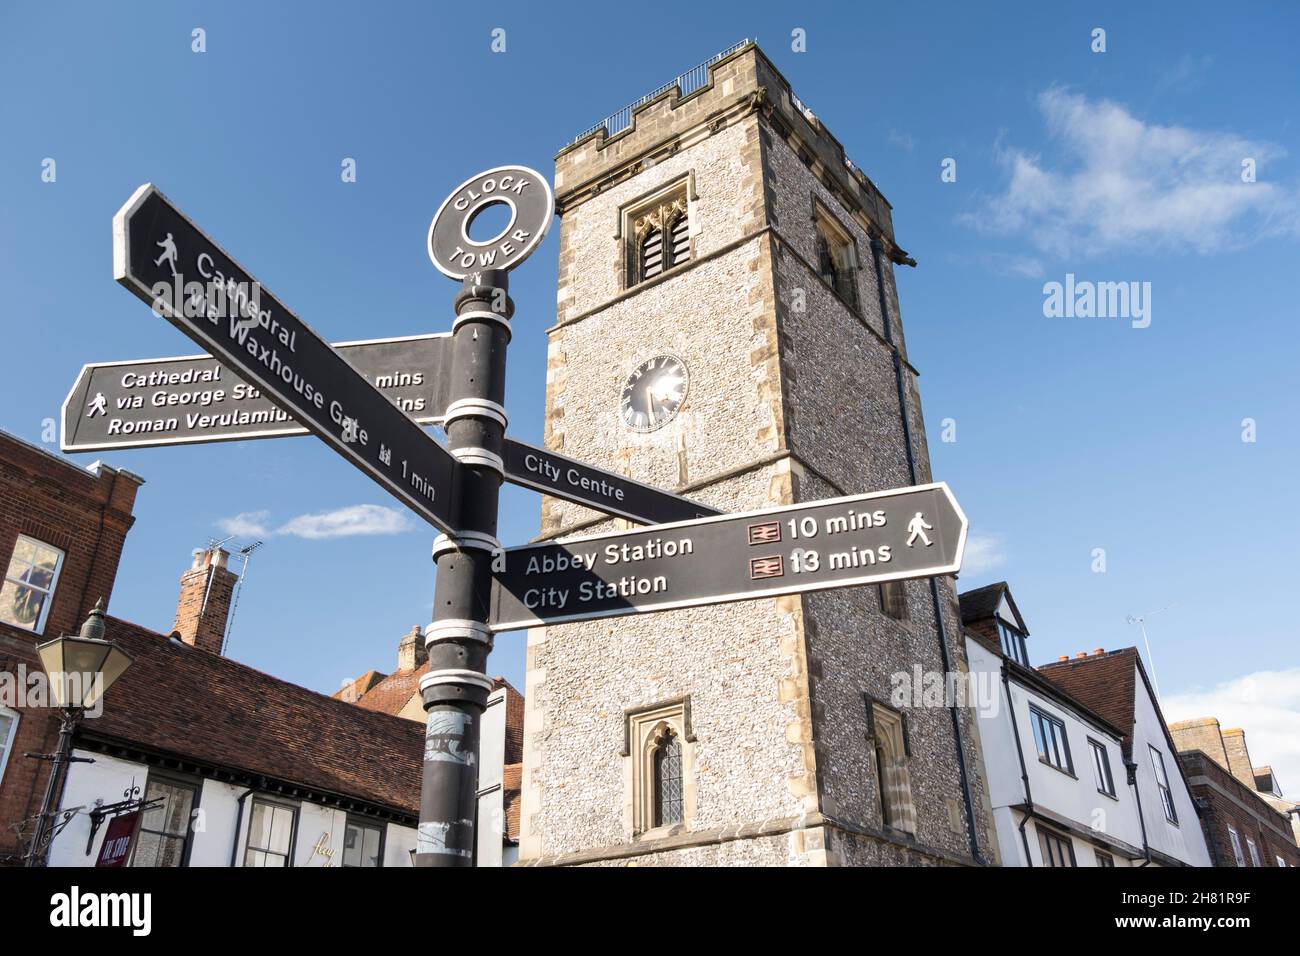 St Albans clock tower and tourist signpost, St Albans, Hertfordshire, UK. Stock Photo